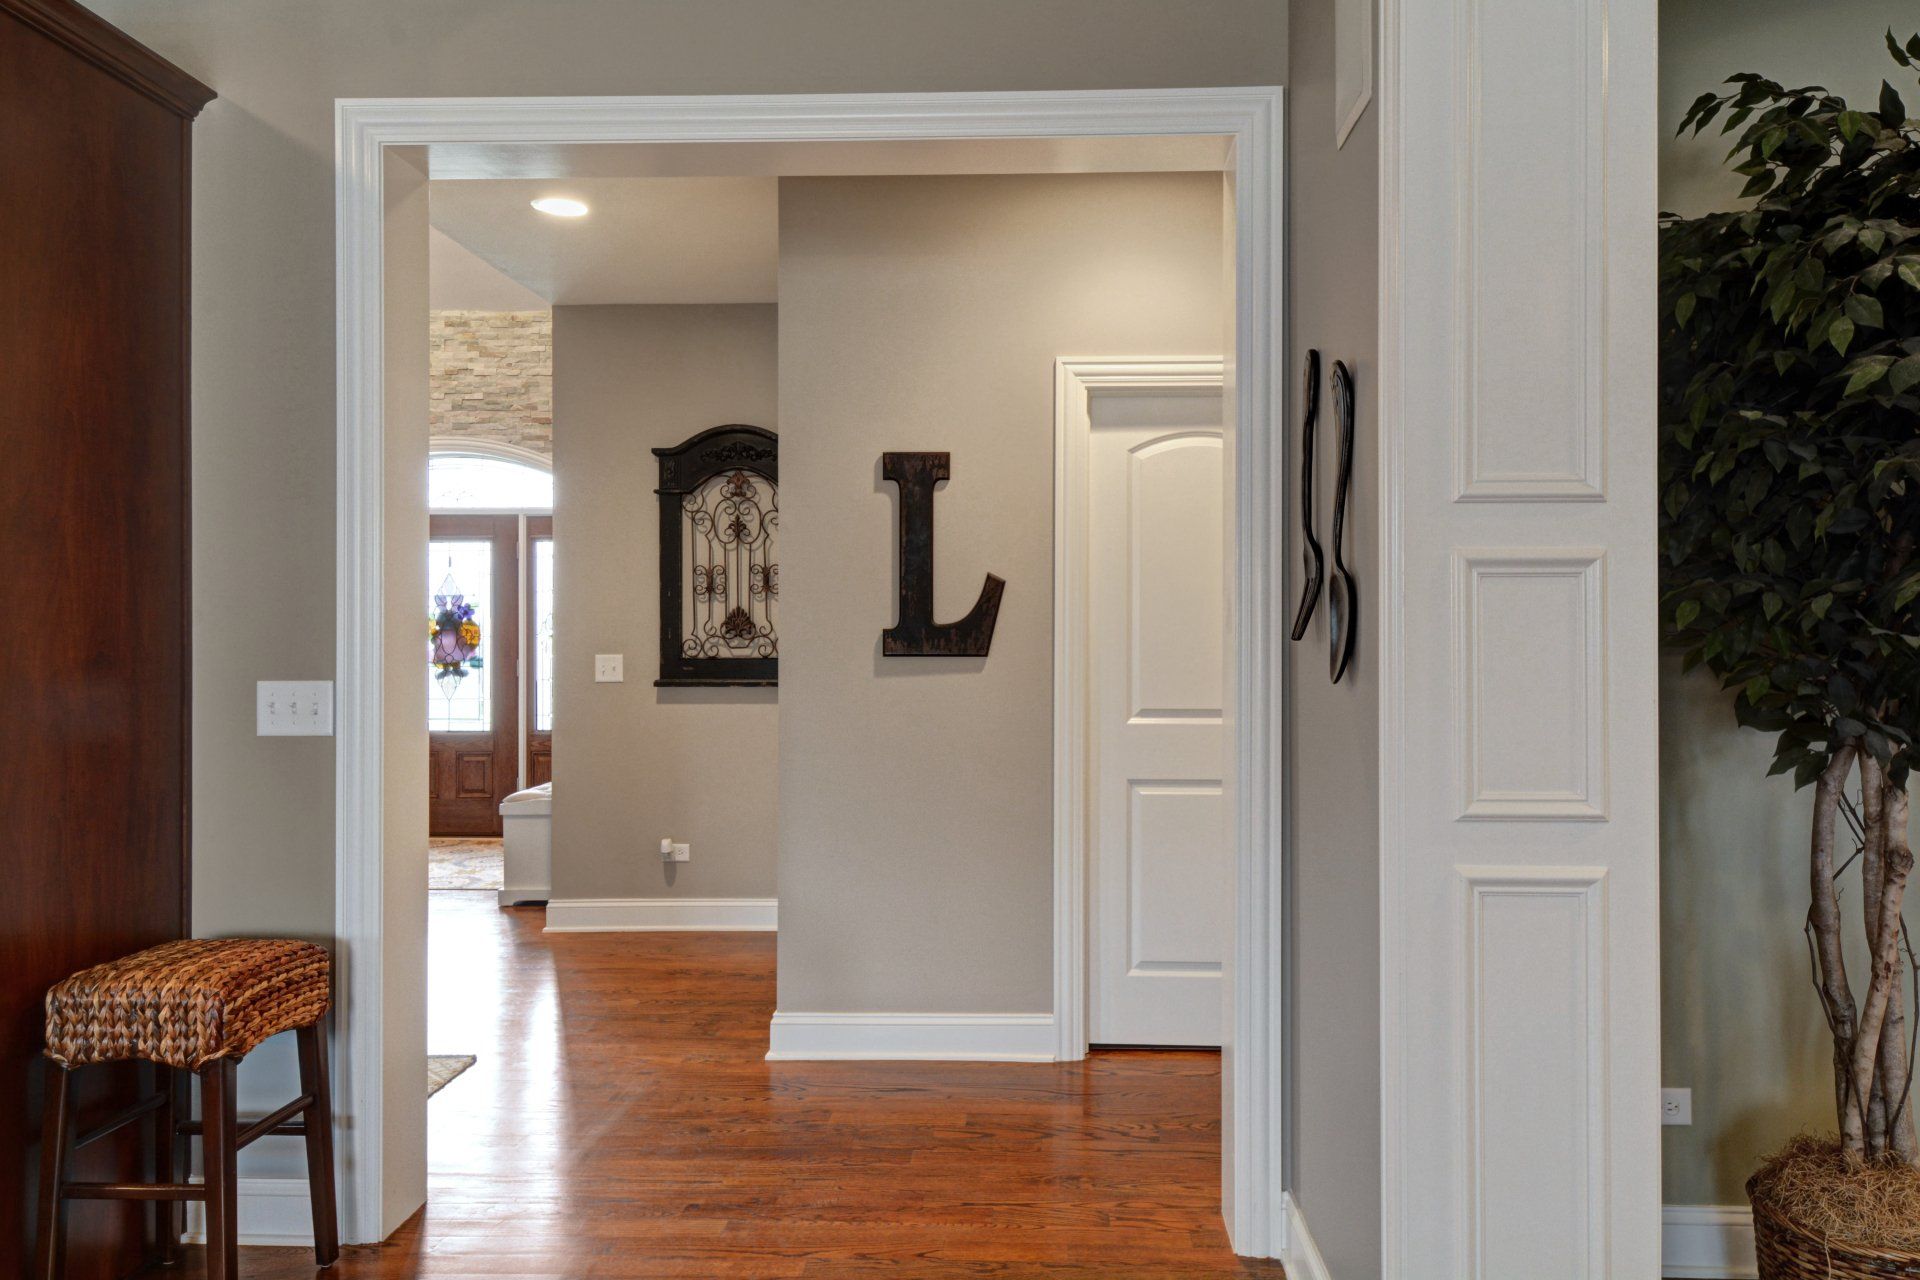 a hallway in a house with hardwood floors and a clock on the wall .